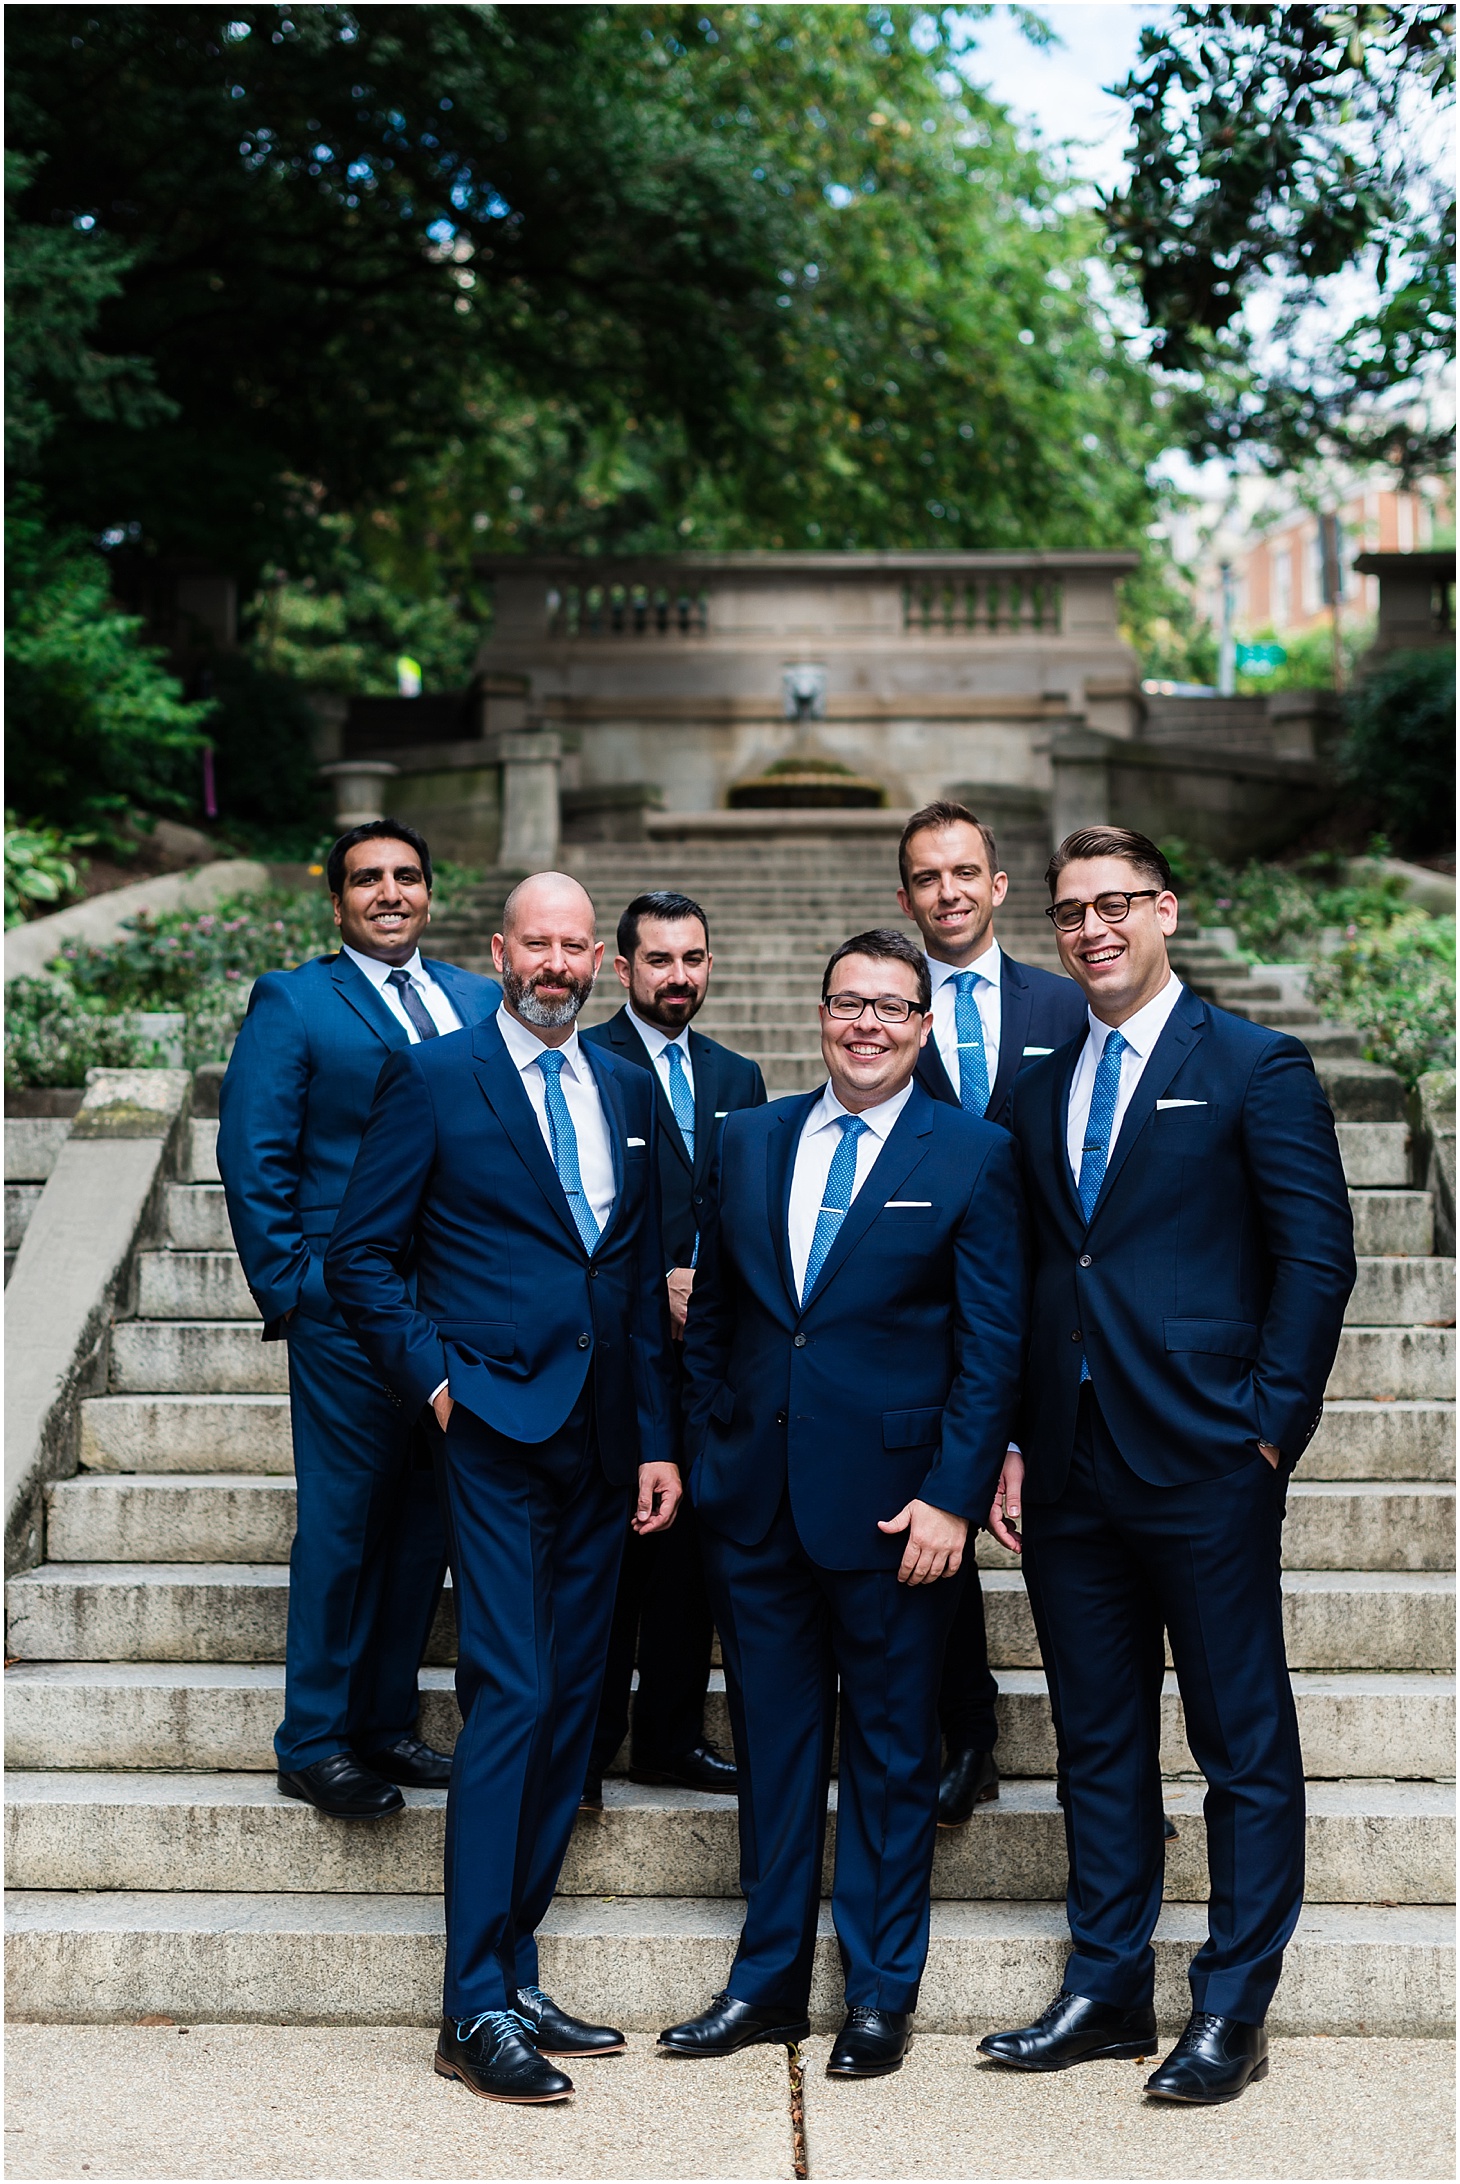 Groom and Groomsmen at Spanish Steps | French-Inspired Garden Wedding at Dumbarton House in Georgetown | Sarah Bradshaw Photography | DC Wedding Photographer